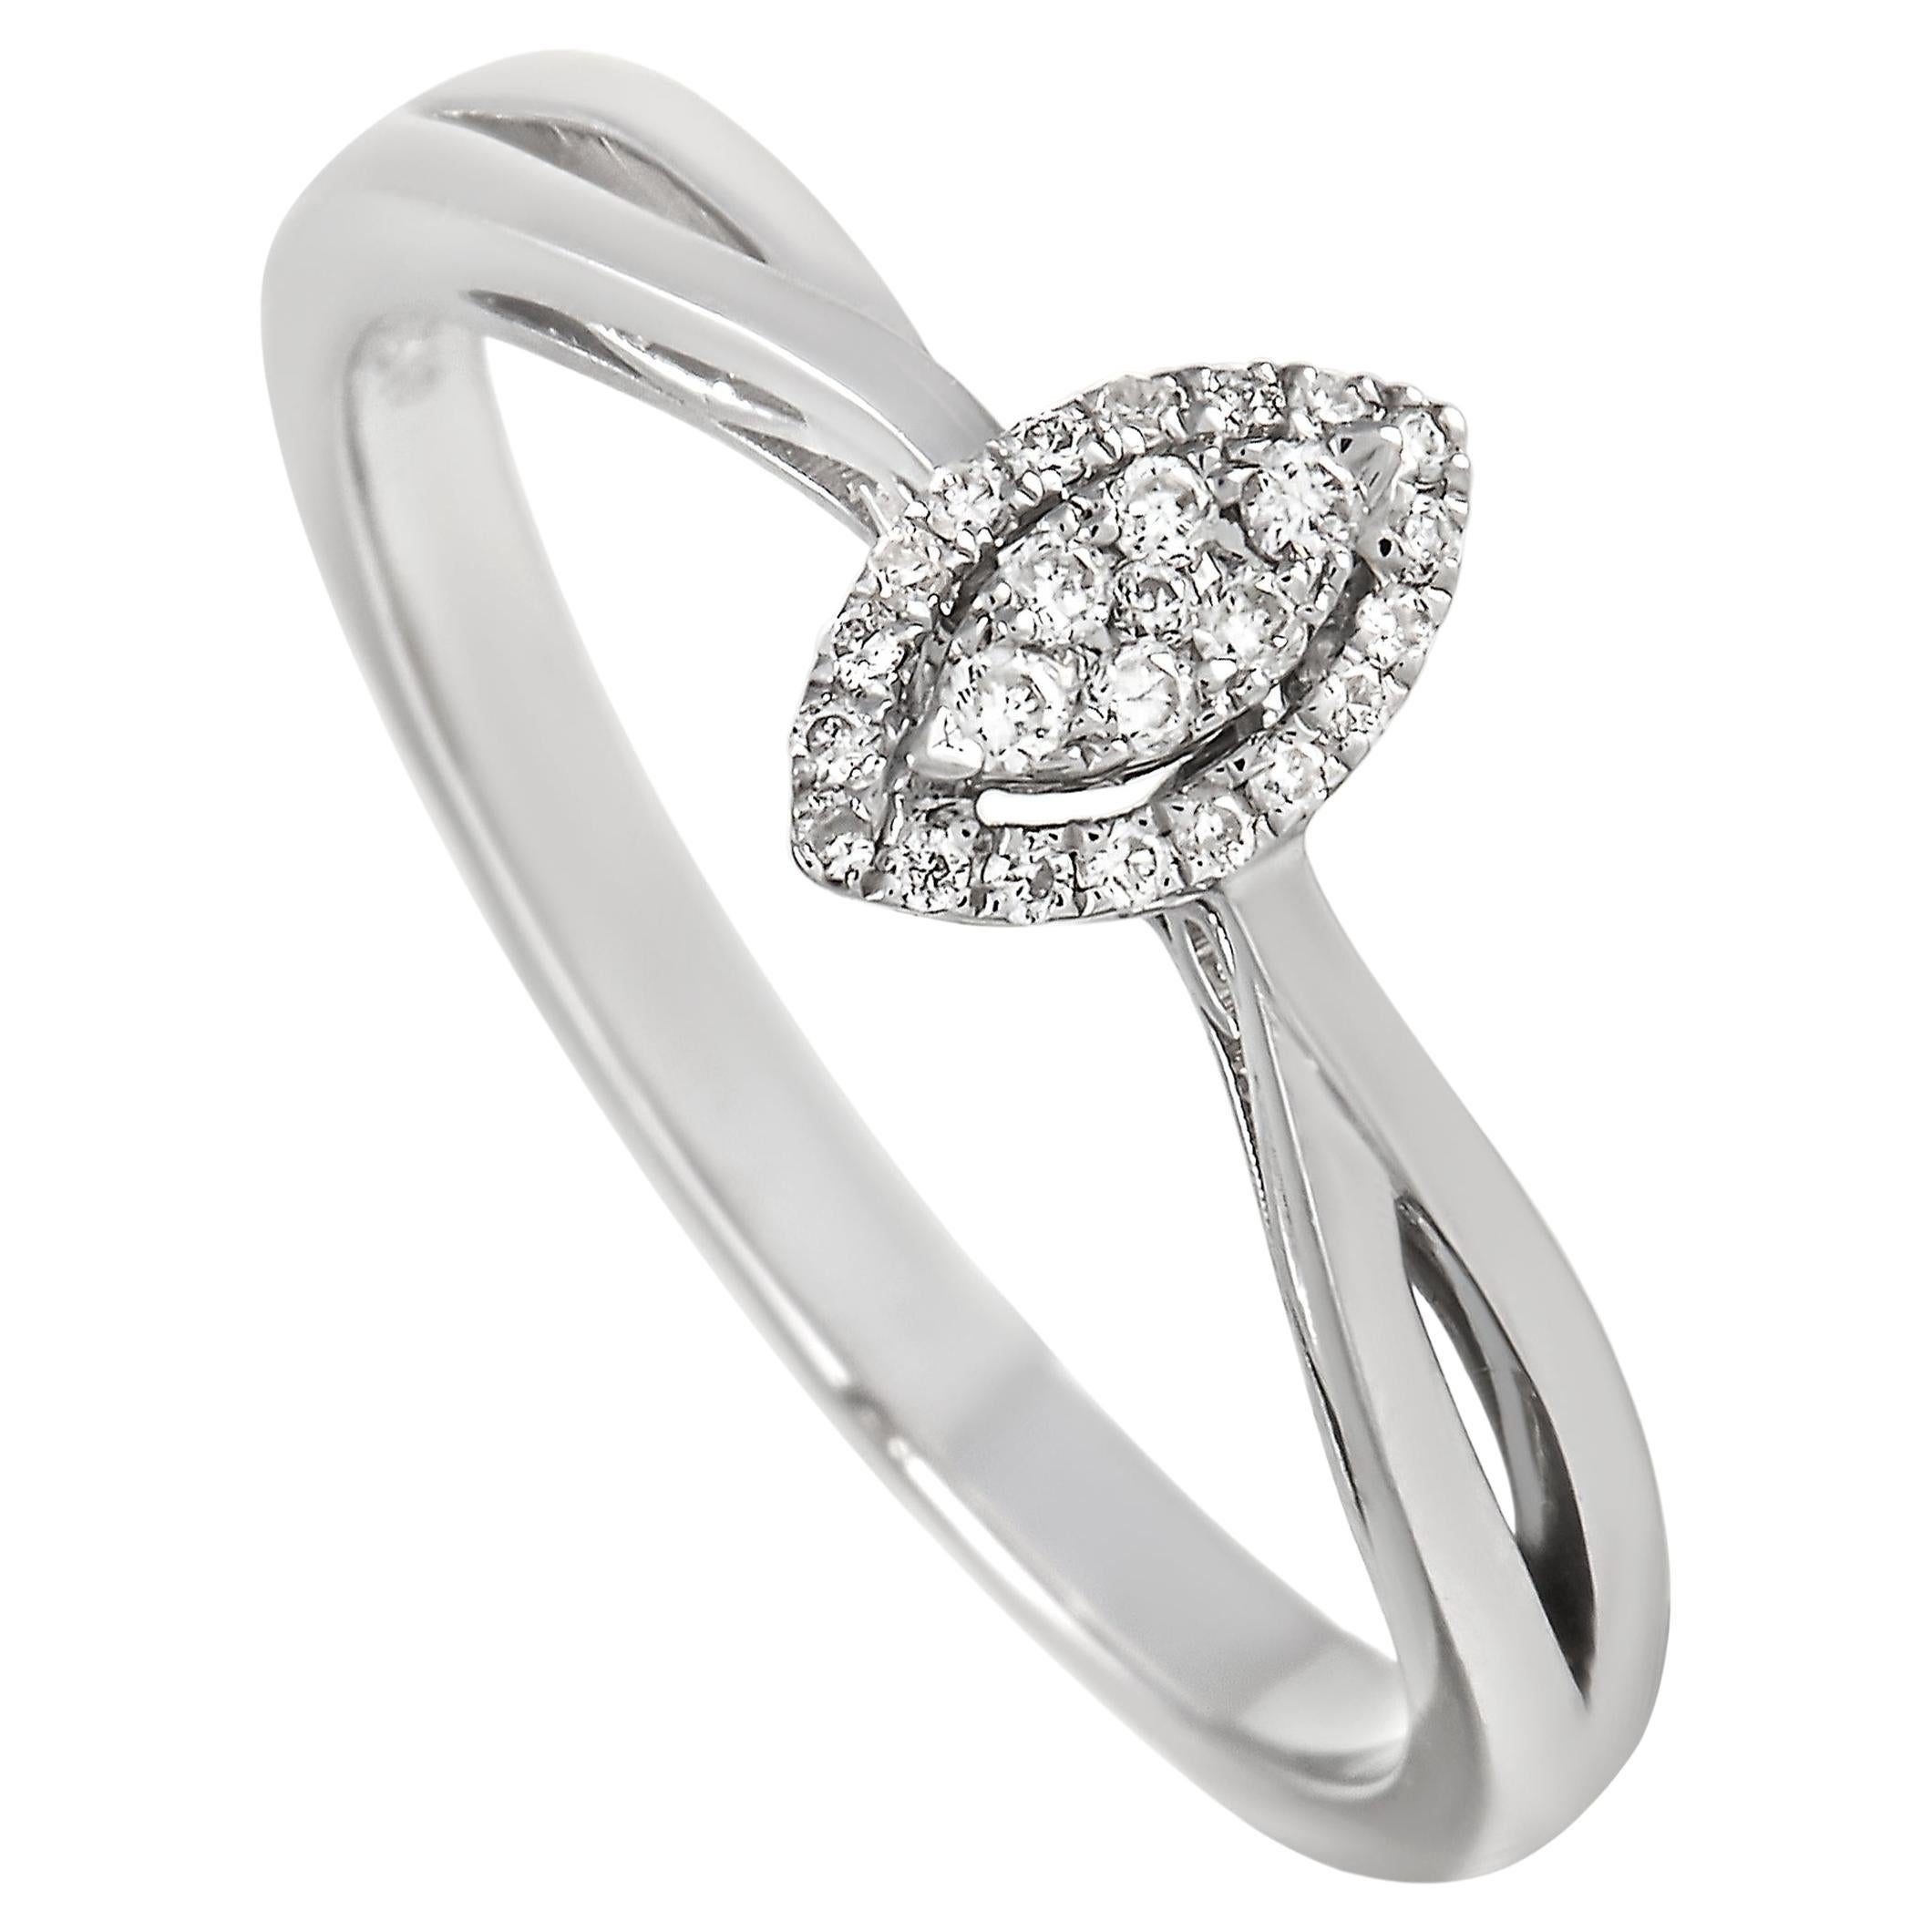 LB Exclusive 14K White Gold 0.10 Ct Diamond Ring For Sale